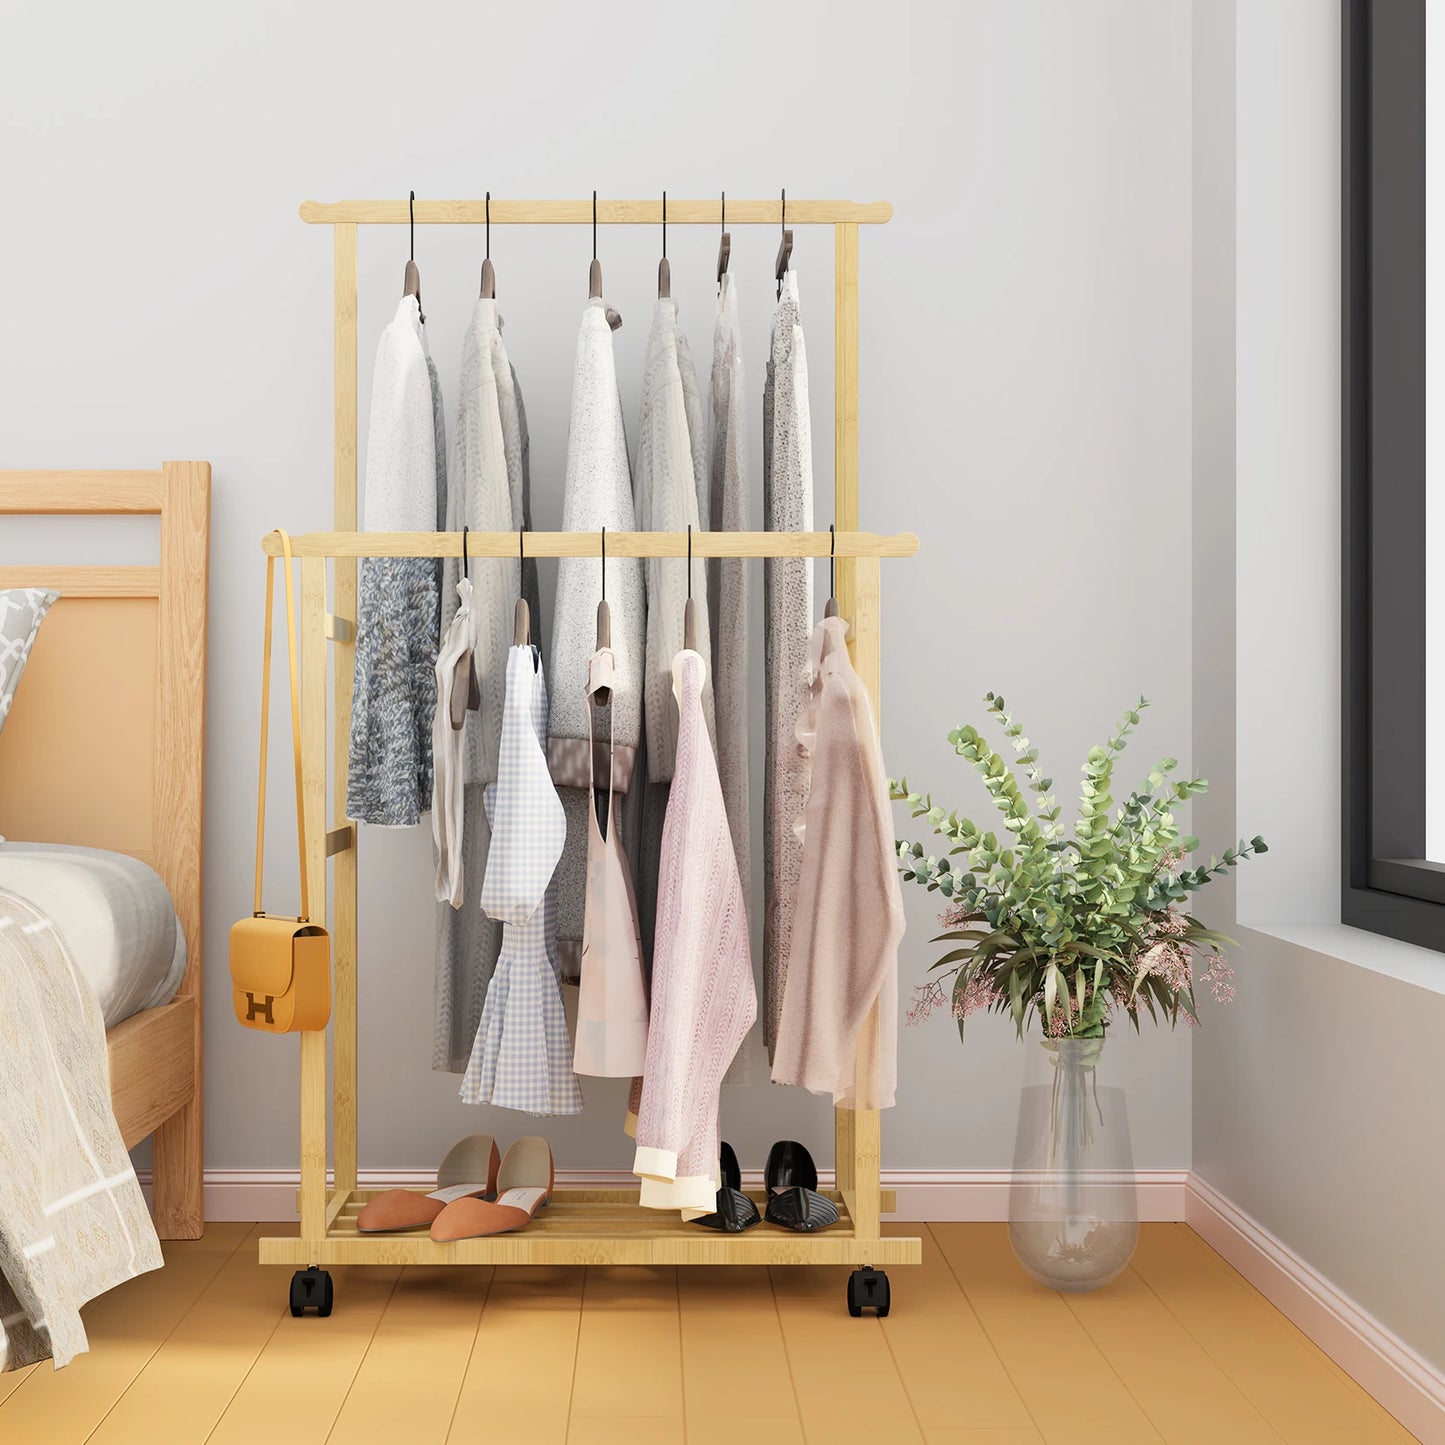 Bamboo Clothes Rail Rack Double Hanging Rails Clothes Rack on Wheels Free Standing Garment Rack with Storage Shelves Coat Rack